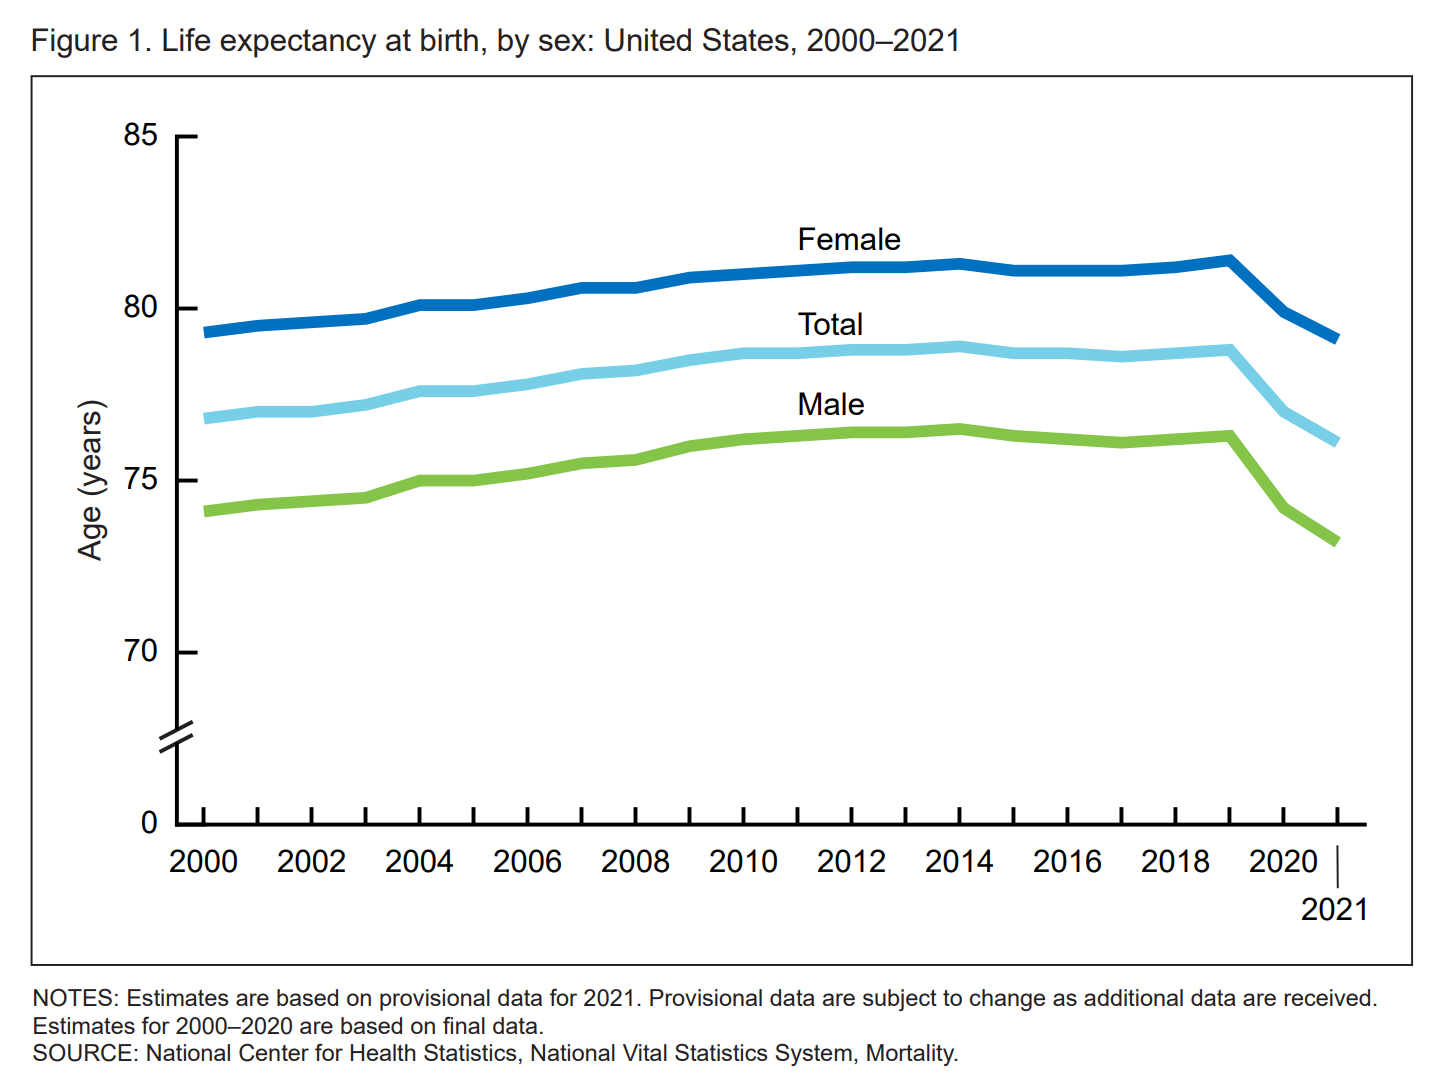 U.S. life expectancy at birth, by sex, 2000 2021. Estimates are based on provisional data for 2021. Provisional data are subject to change as additional data are received. Estimates for 2000-2020 are based on final data. Graphic: NCHS